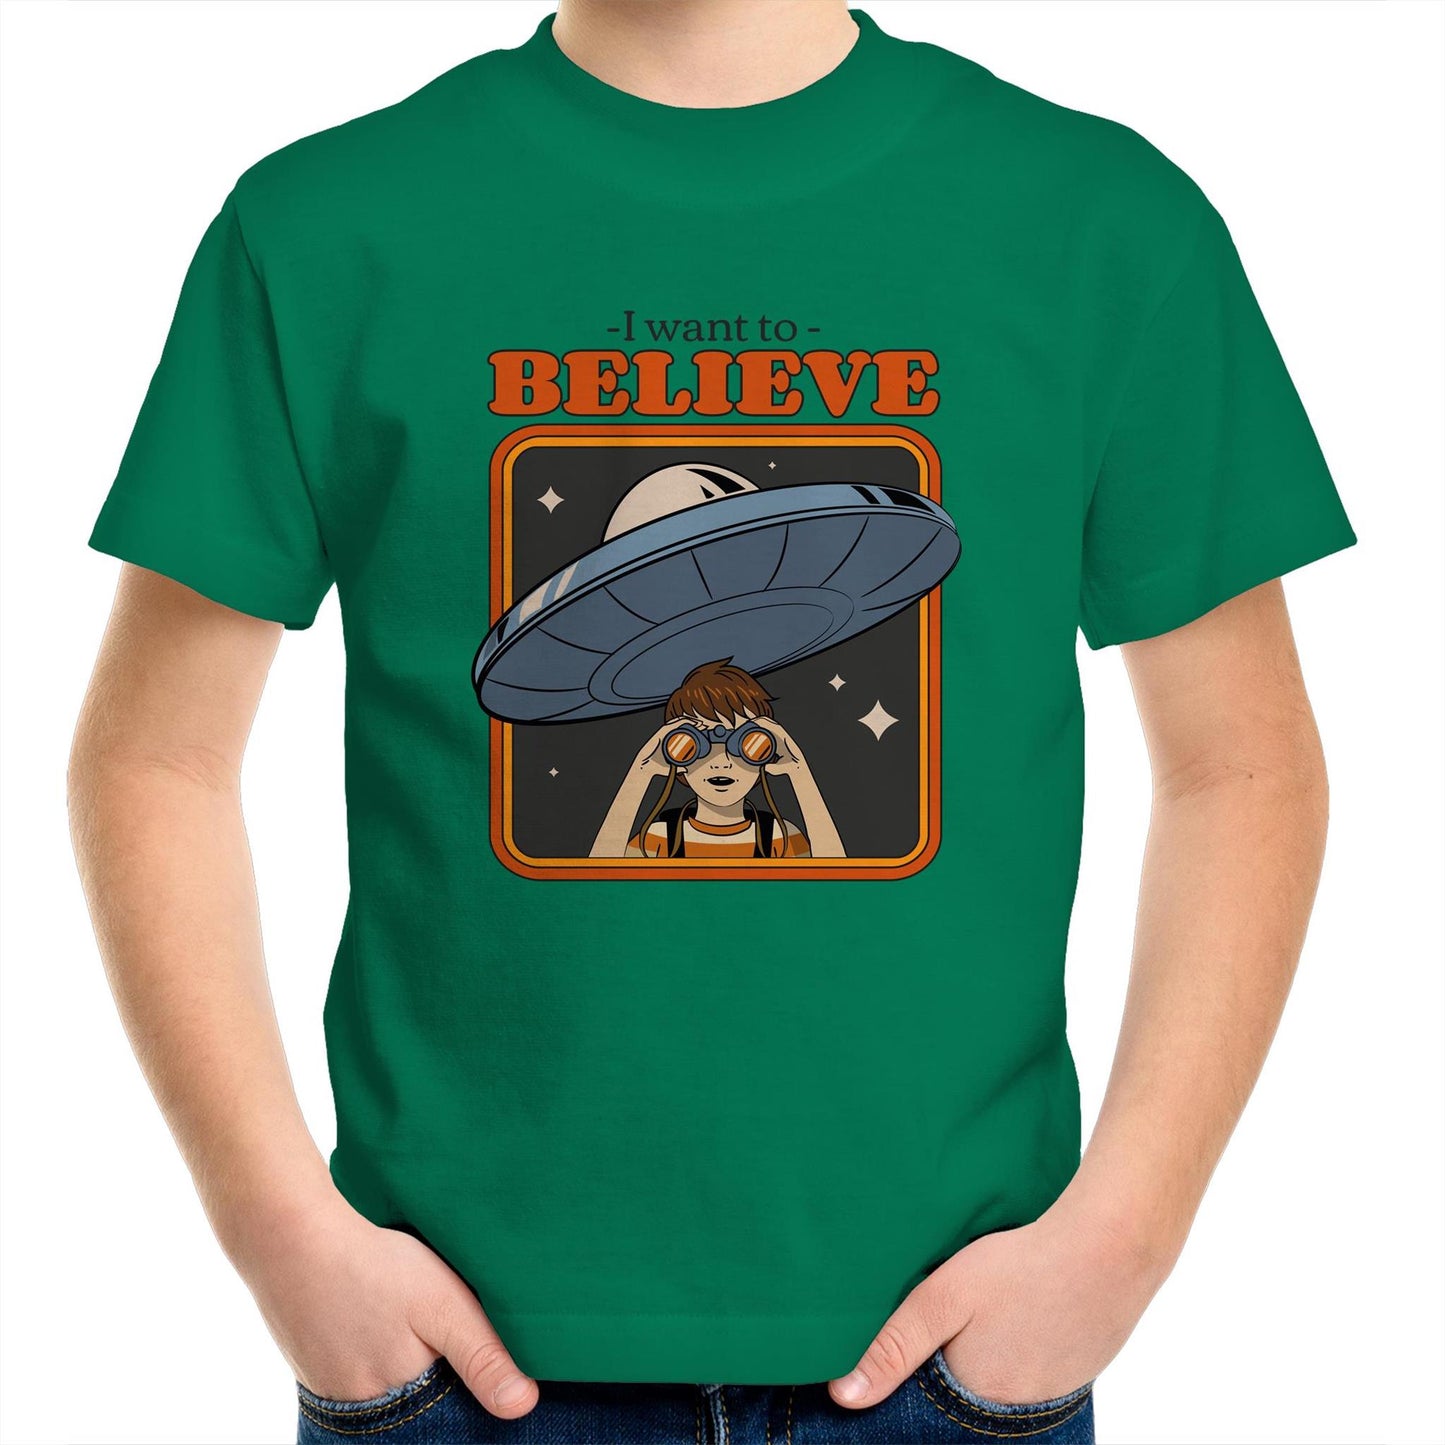 I Want To Believe - Kids Youth Crew T-Shirt Kelly Green Kids Youth T-shirt Sci Fi